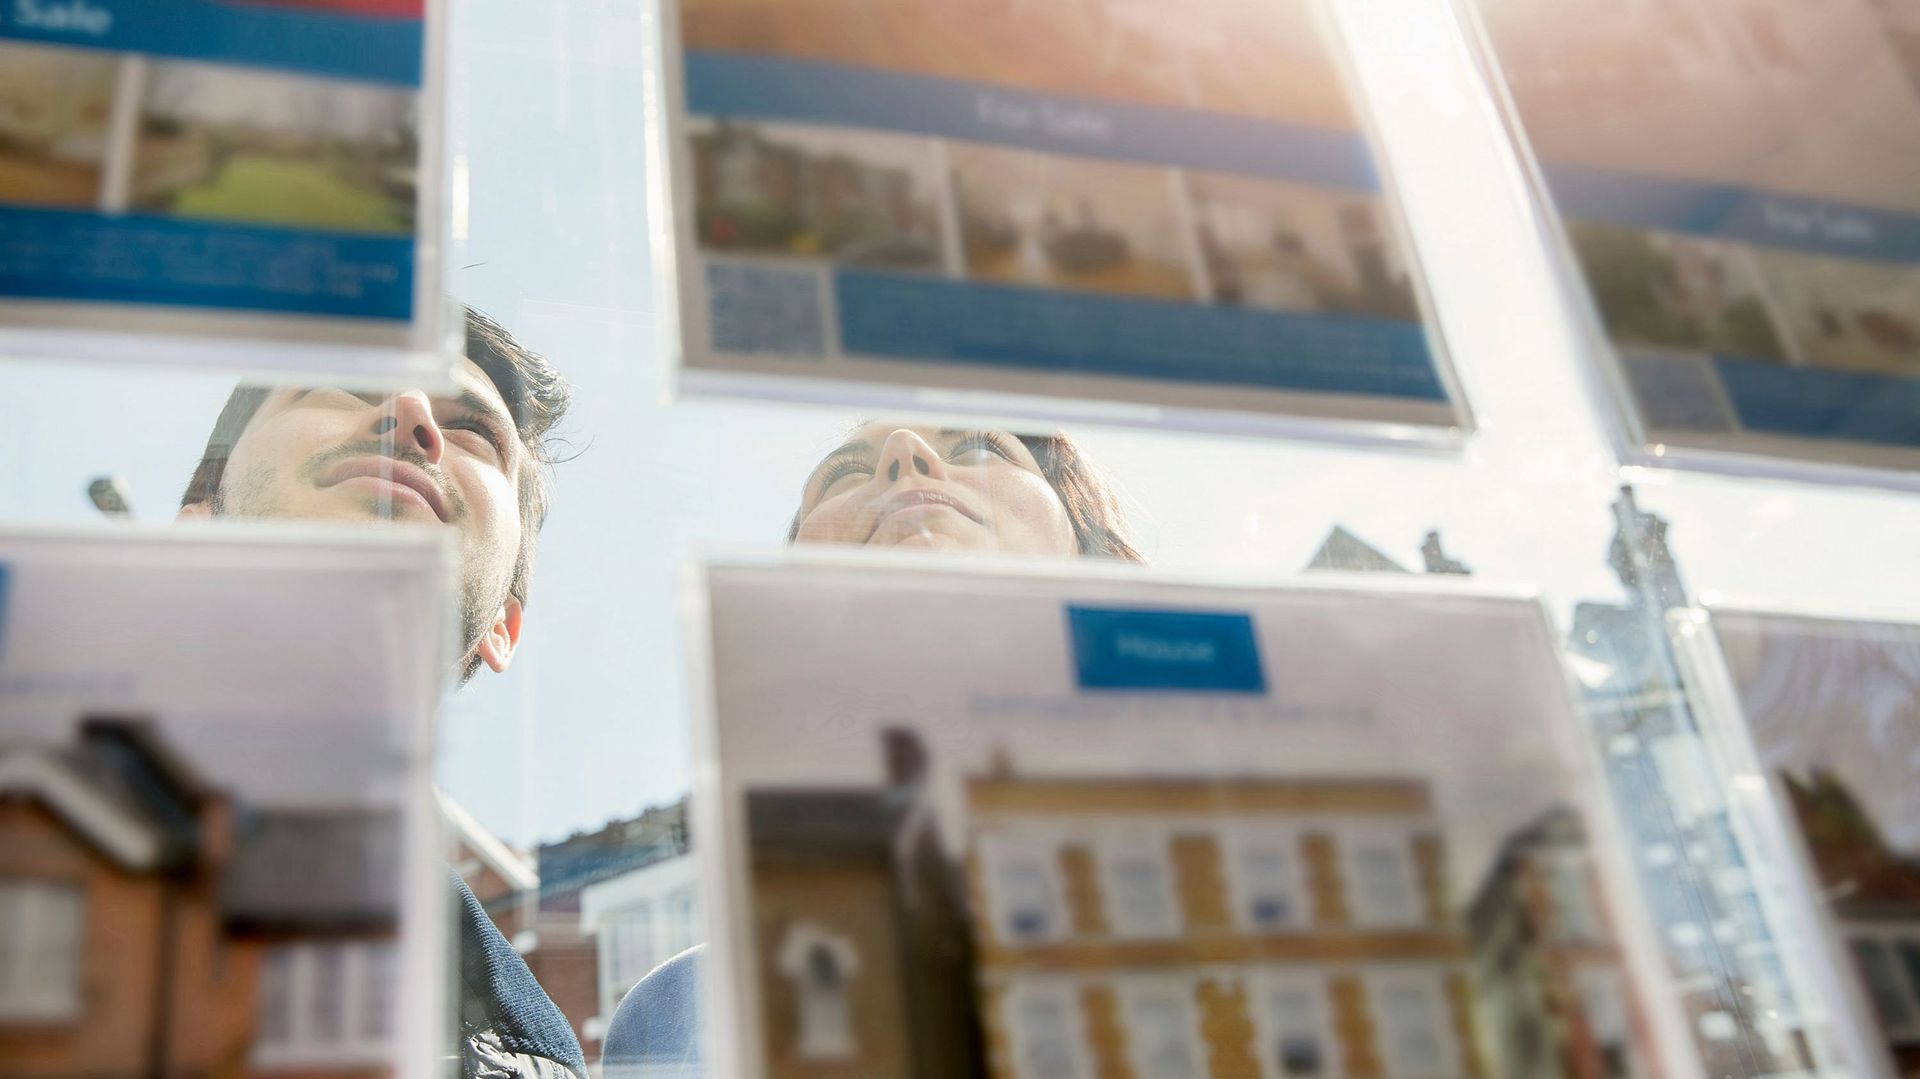 Couple looking at display of advertisements in estate agent window